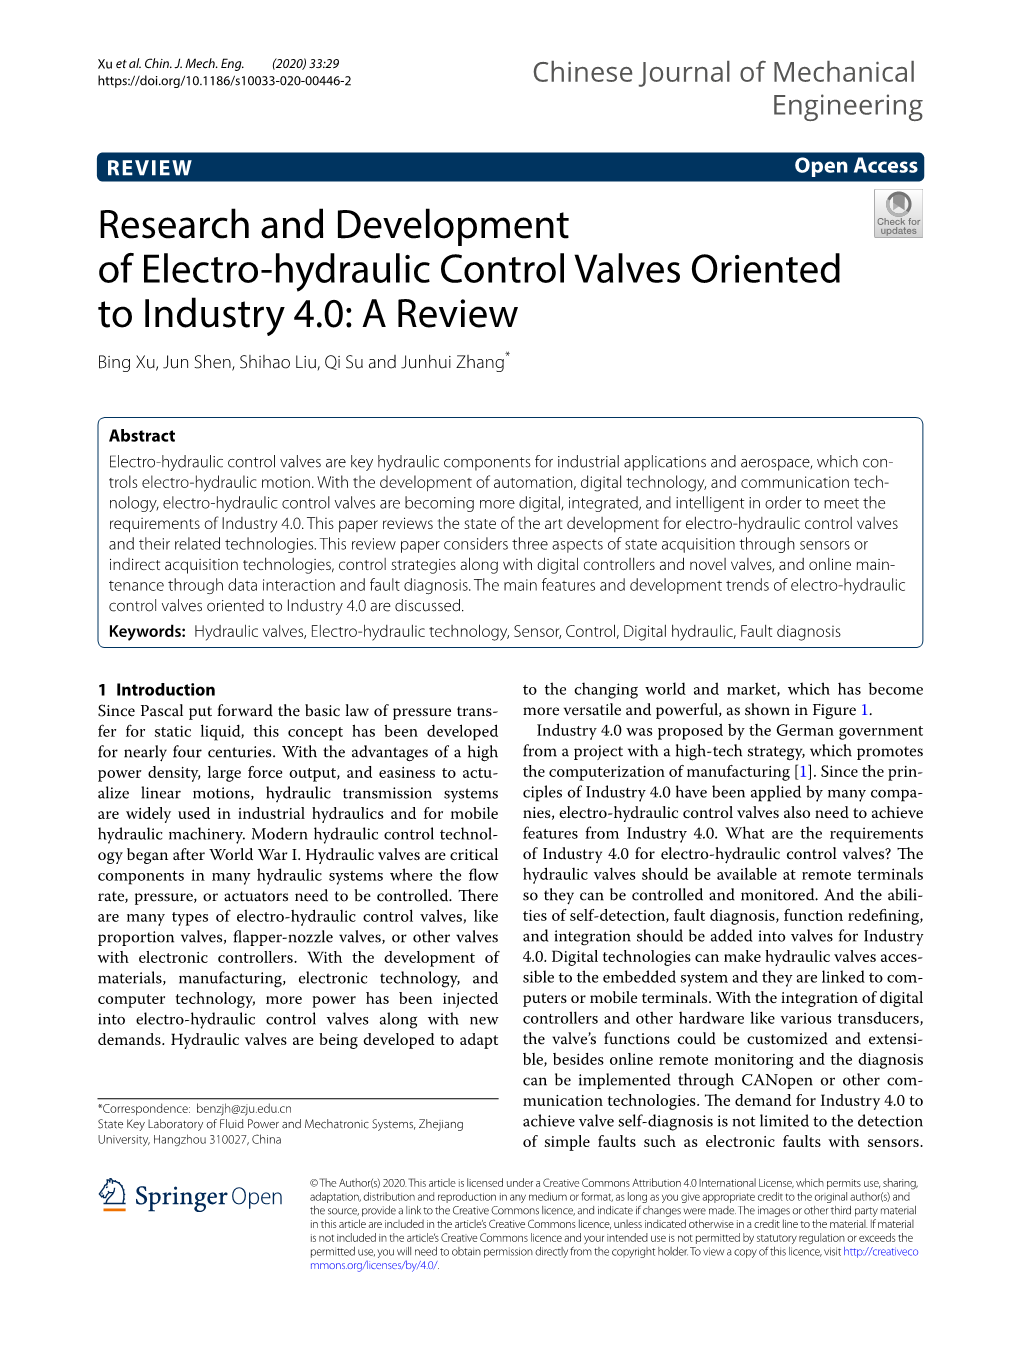 Research and Development of Electro-Hydraulic Control Valves Oriented